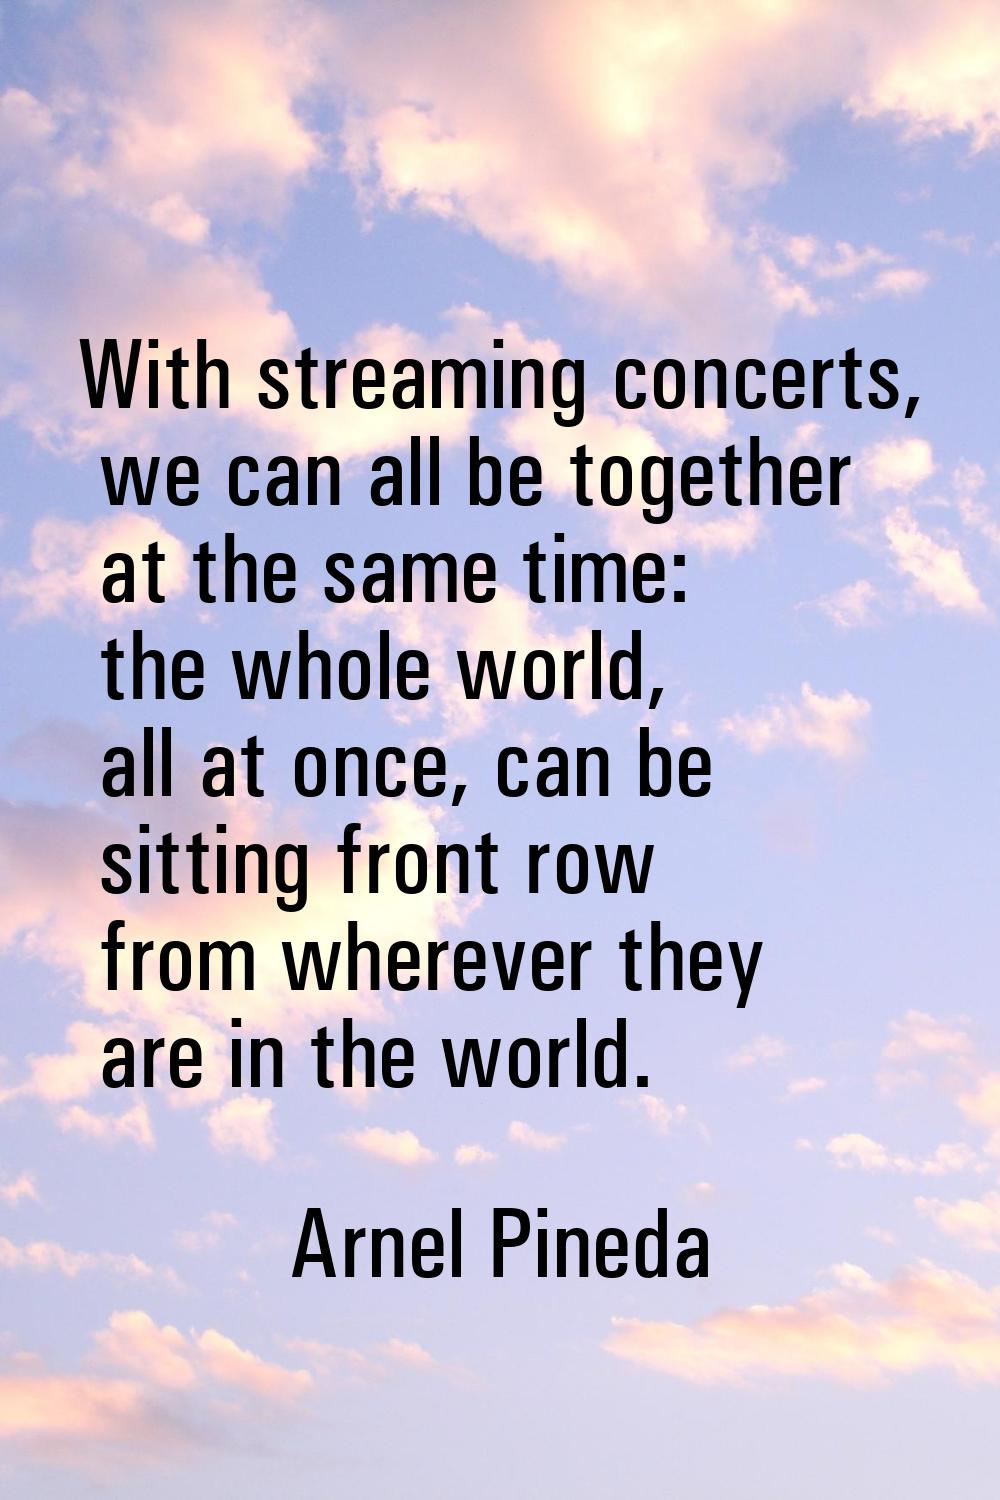 With streaming concerts, we can all be together at the same time: the whole world, all at once, can